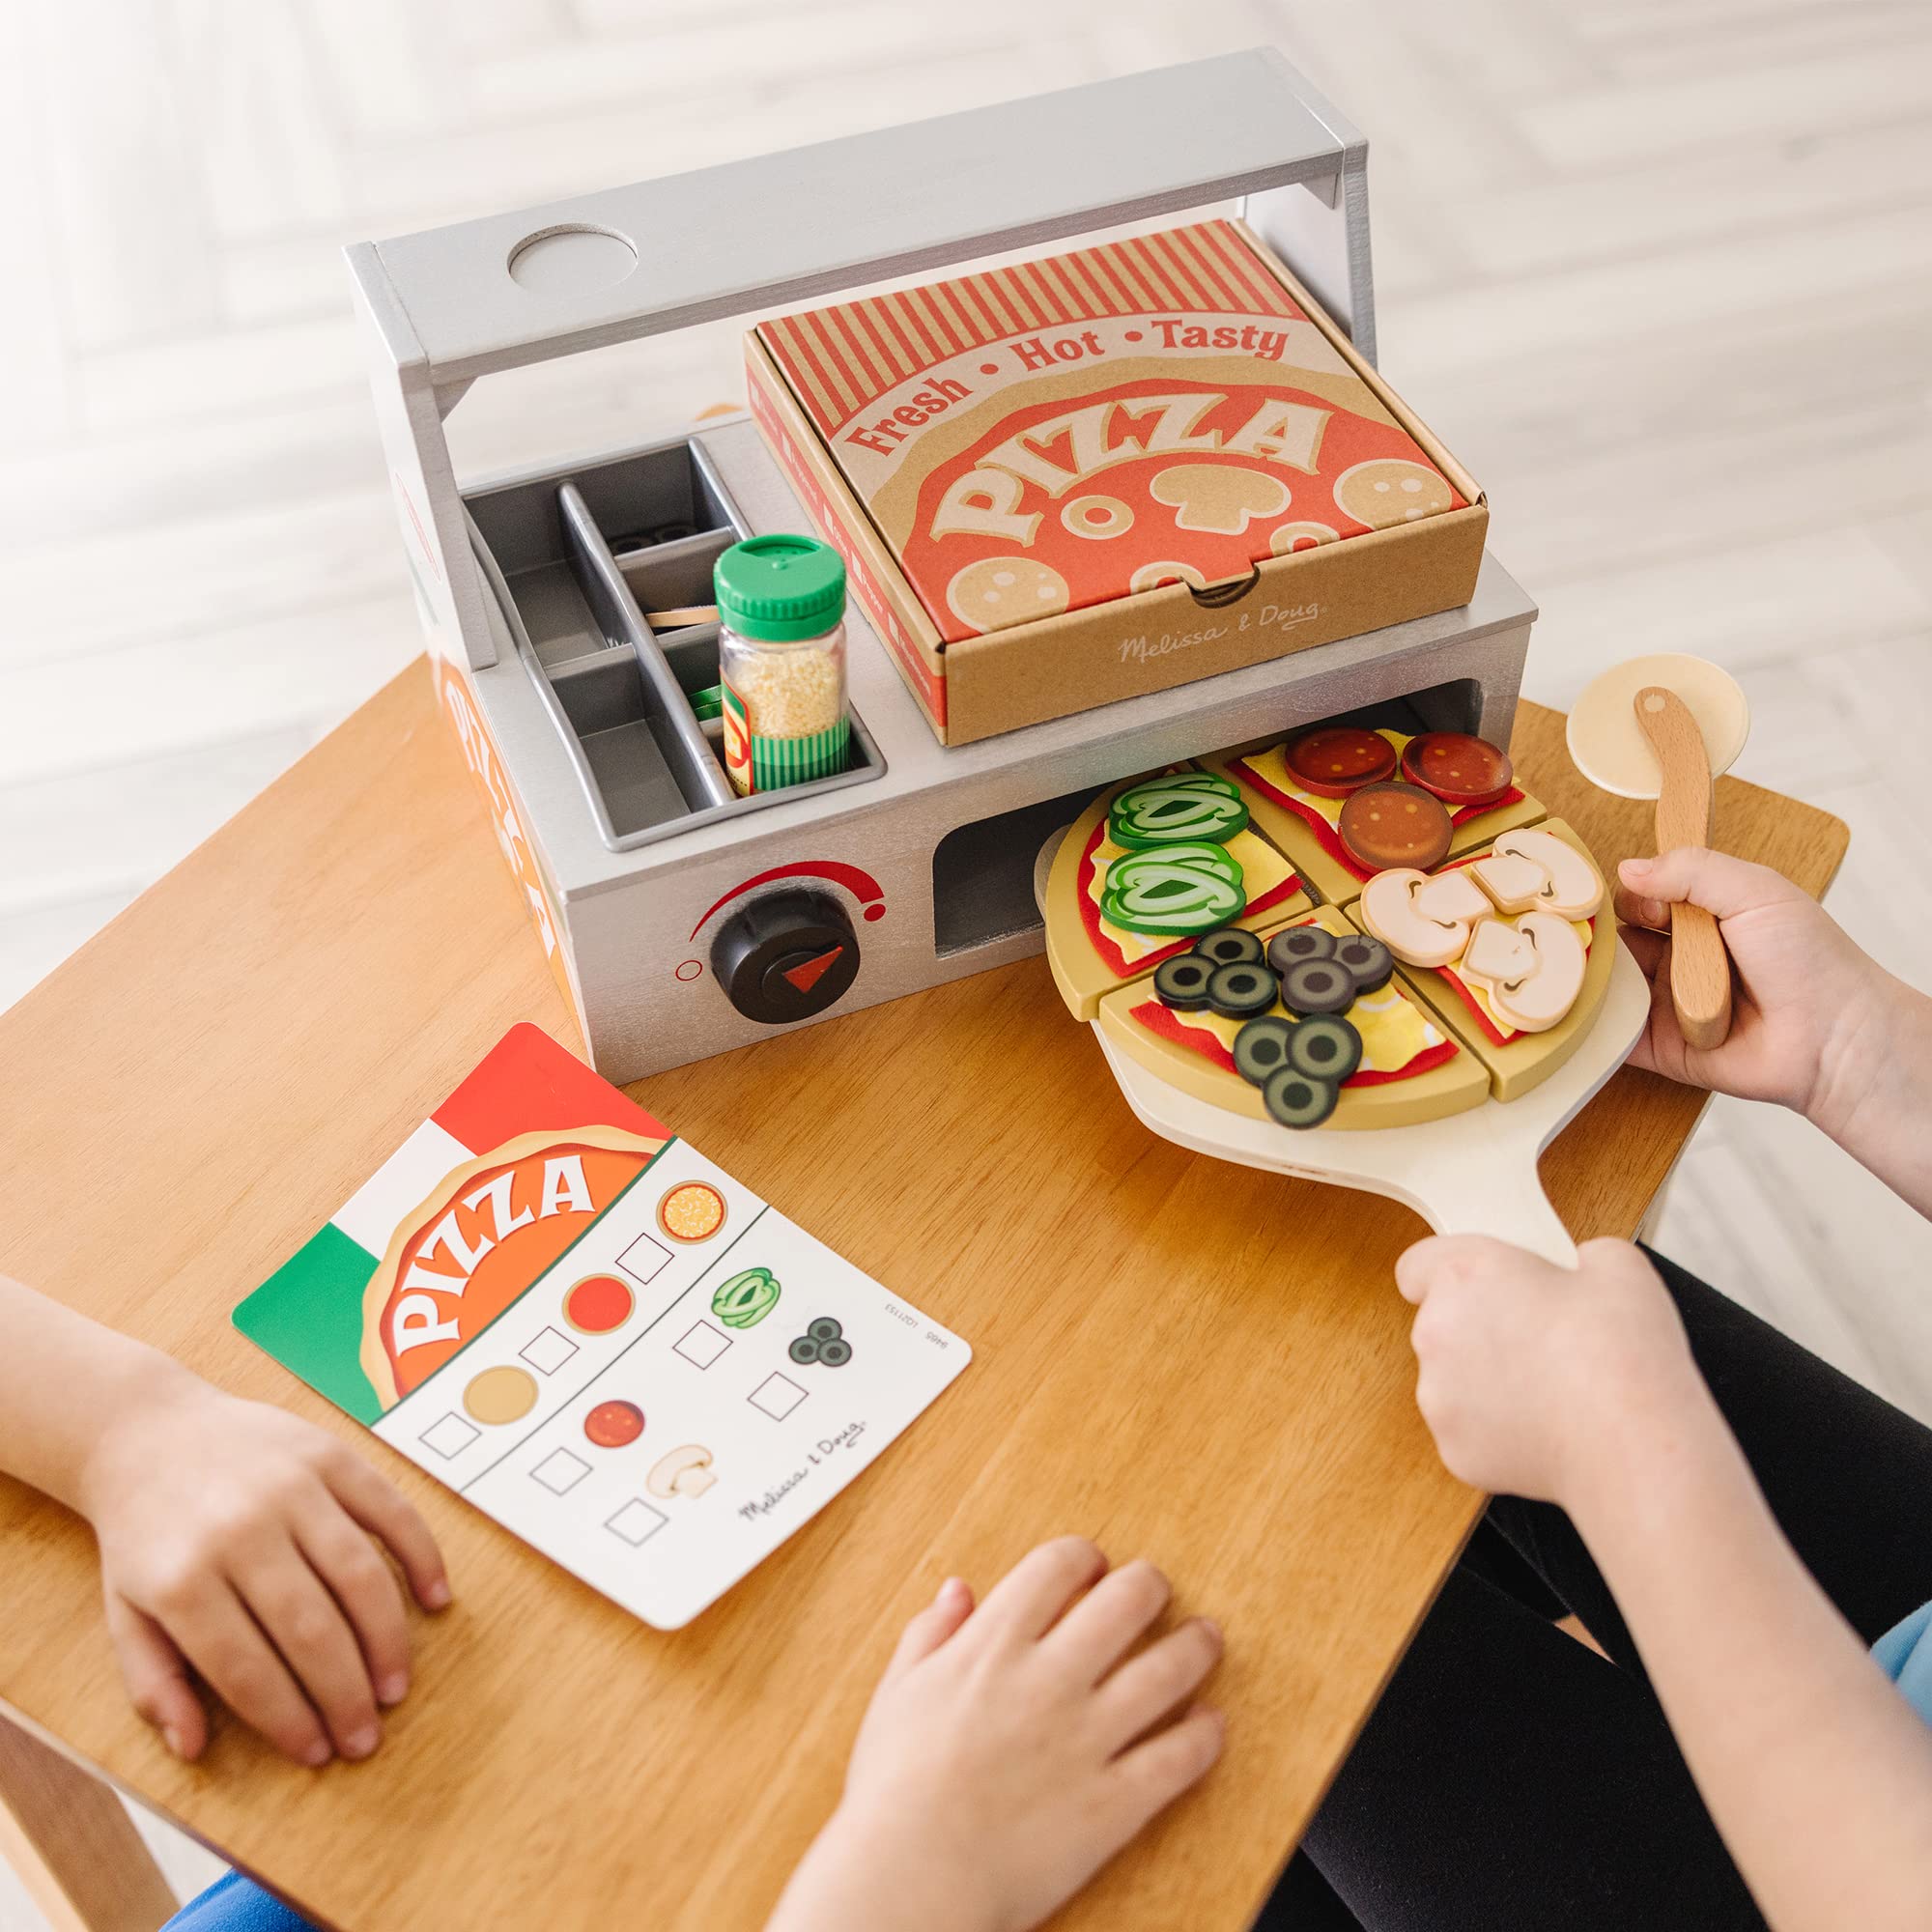 Melissa & Doug Top & Bake Wooden Pizza Counter Play Set (41 Pcs) - Pizza Toy Wooden Play Food Set, Pretend Pizza Sets For Kids Ages 3+